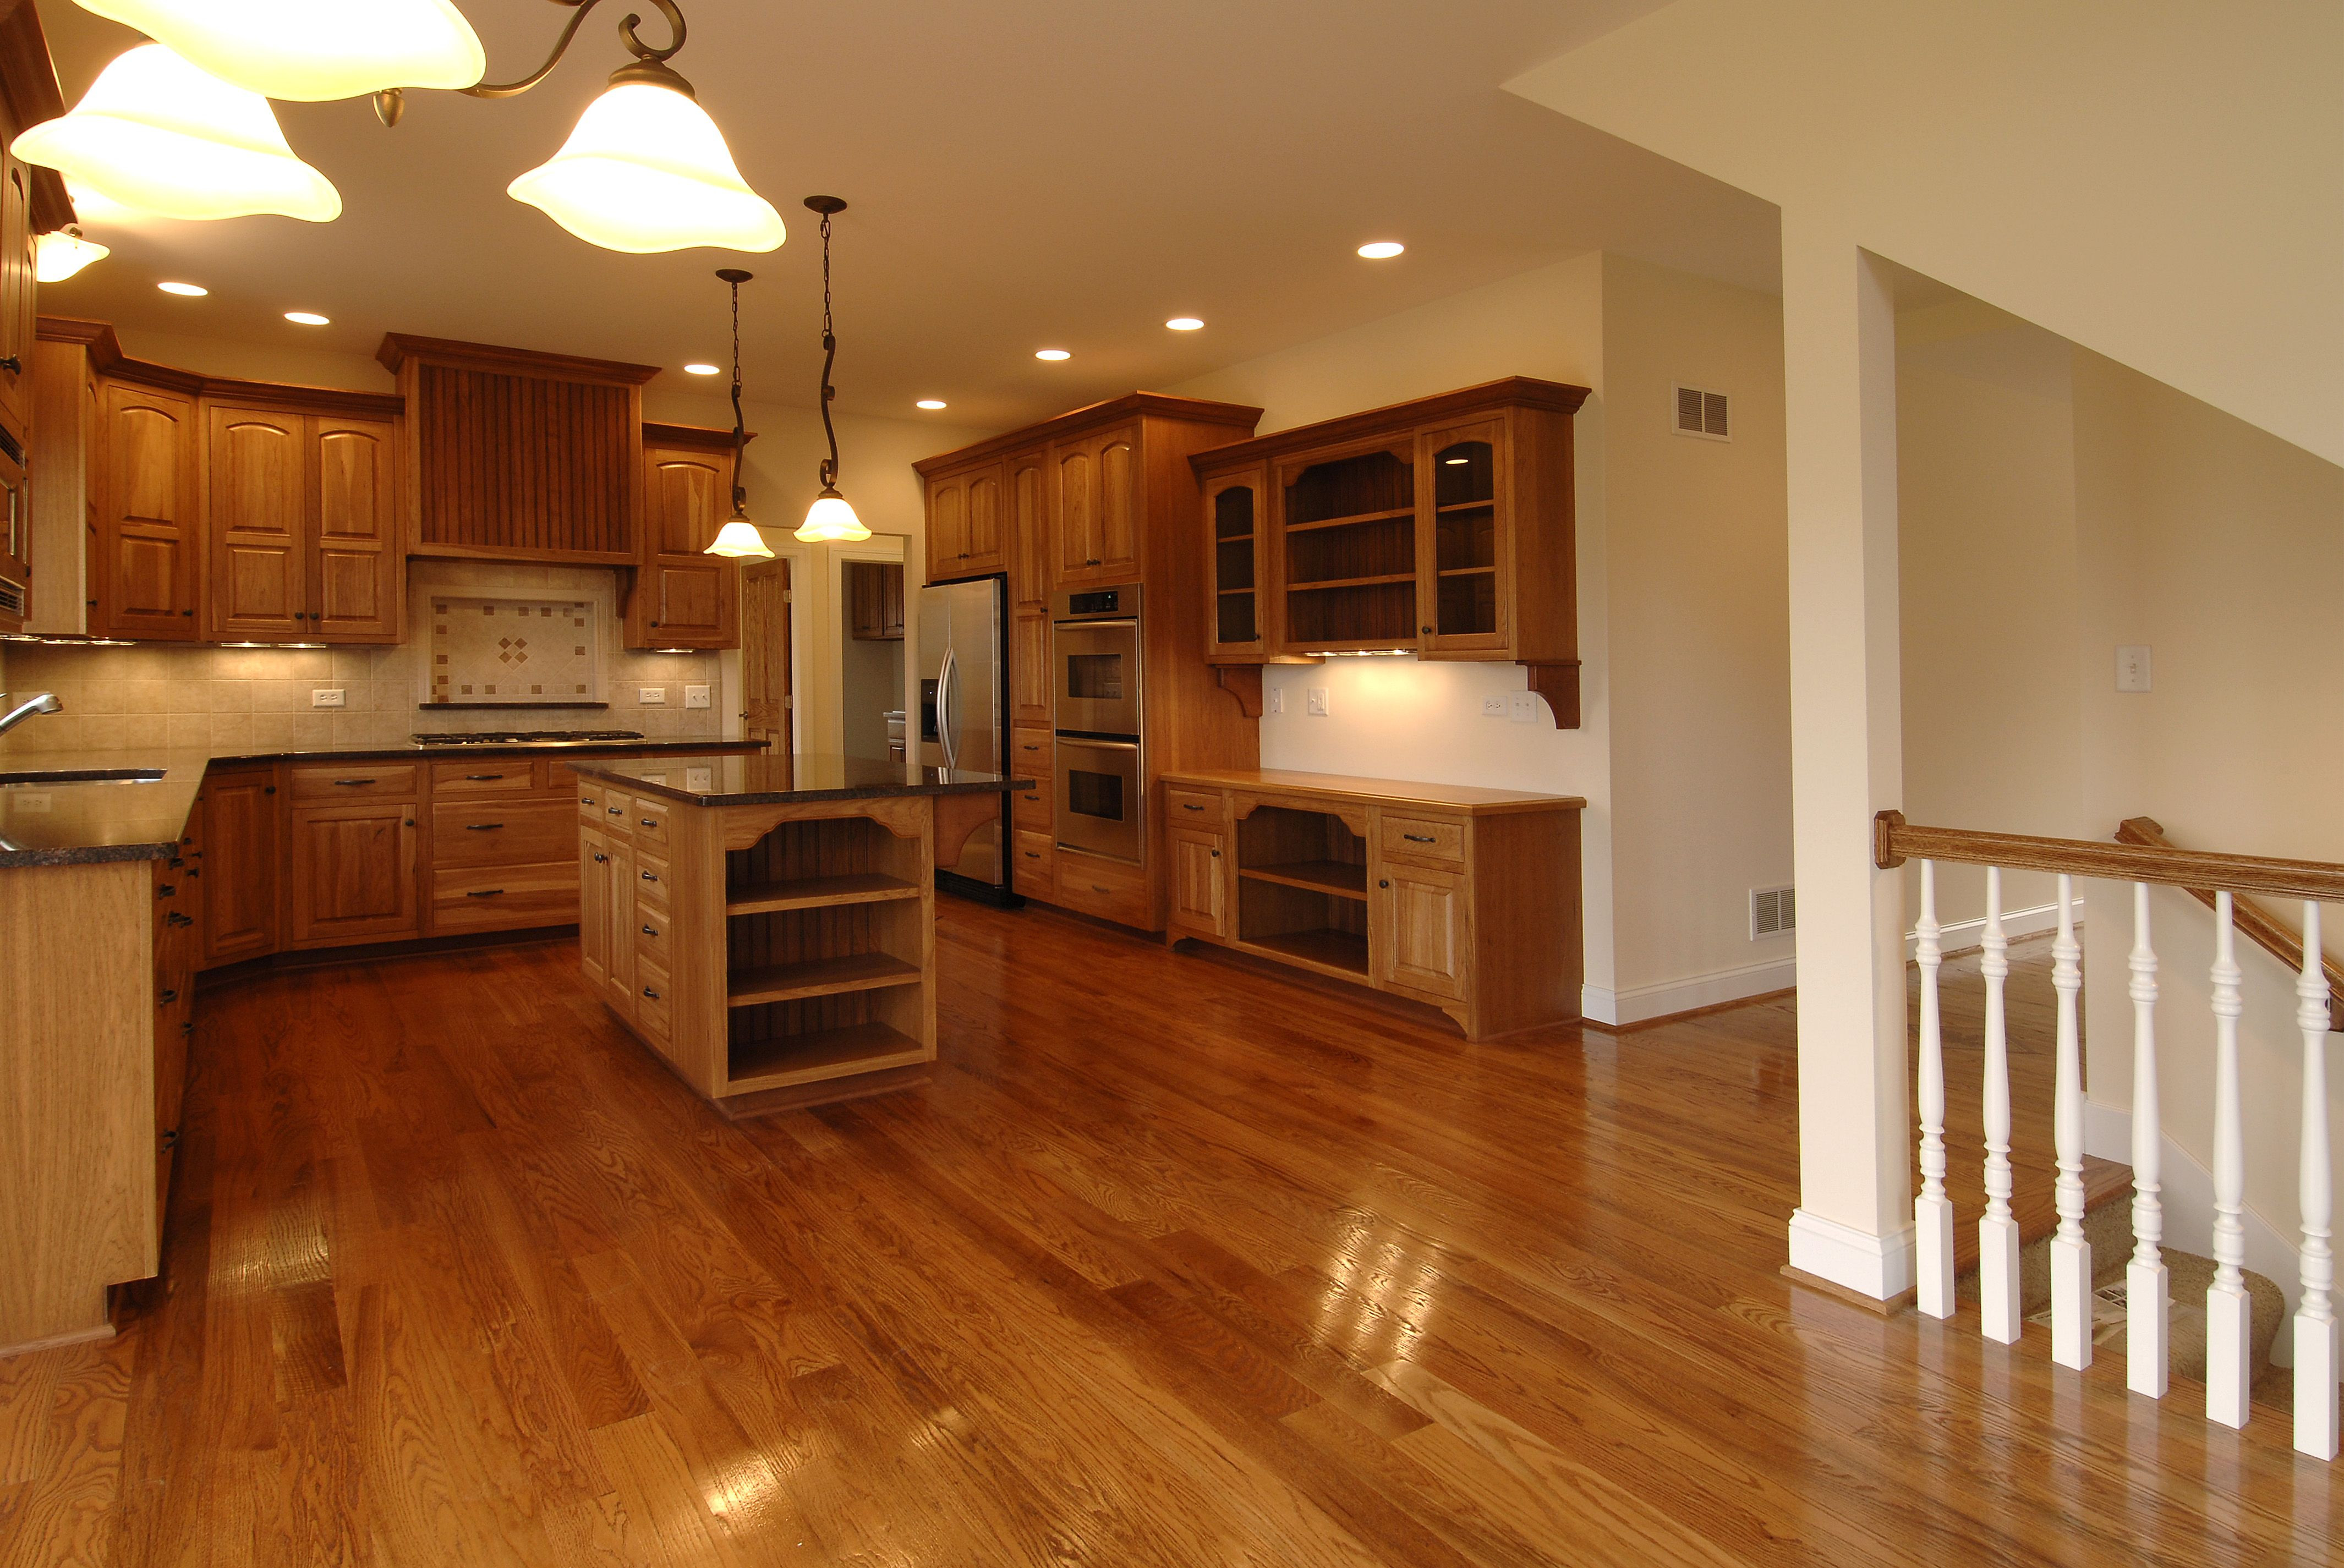 27 Amazing Hardwood Floor Manufacturers Ratings 2024 free download hardwood floor manufacturers ratings of rave reviews southwest suburbs 1 hardwood flooring company with regard to rave reviews southwest suburbs 1 hardwood flooring company